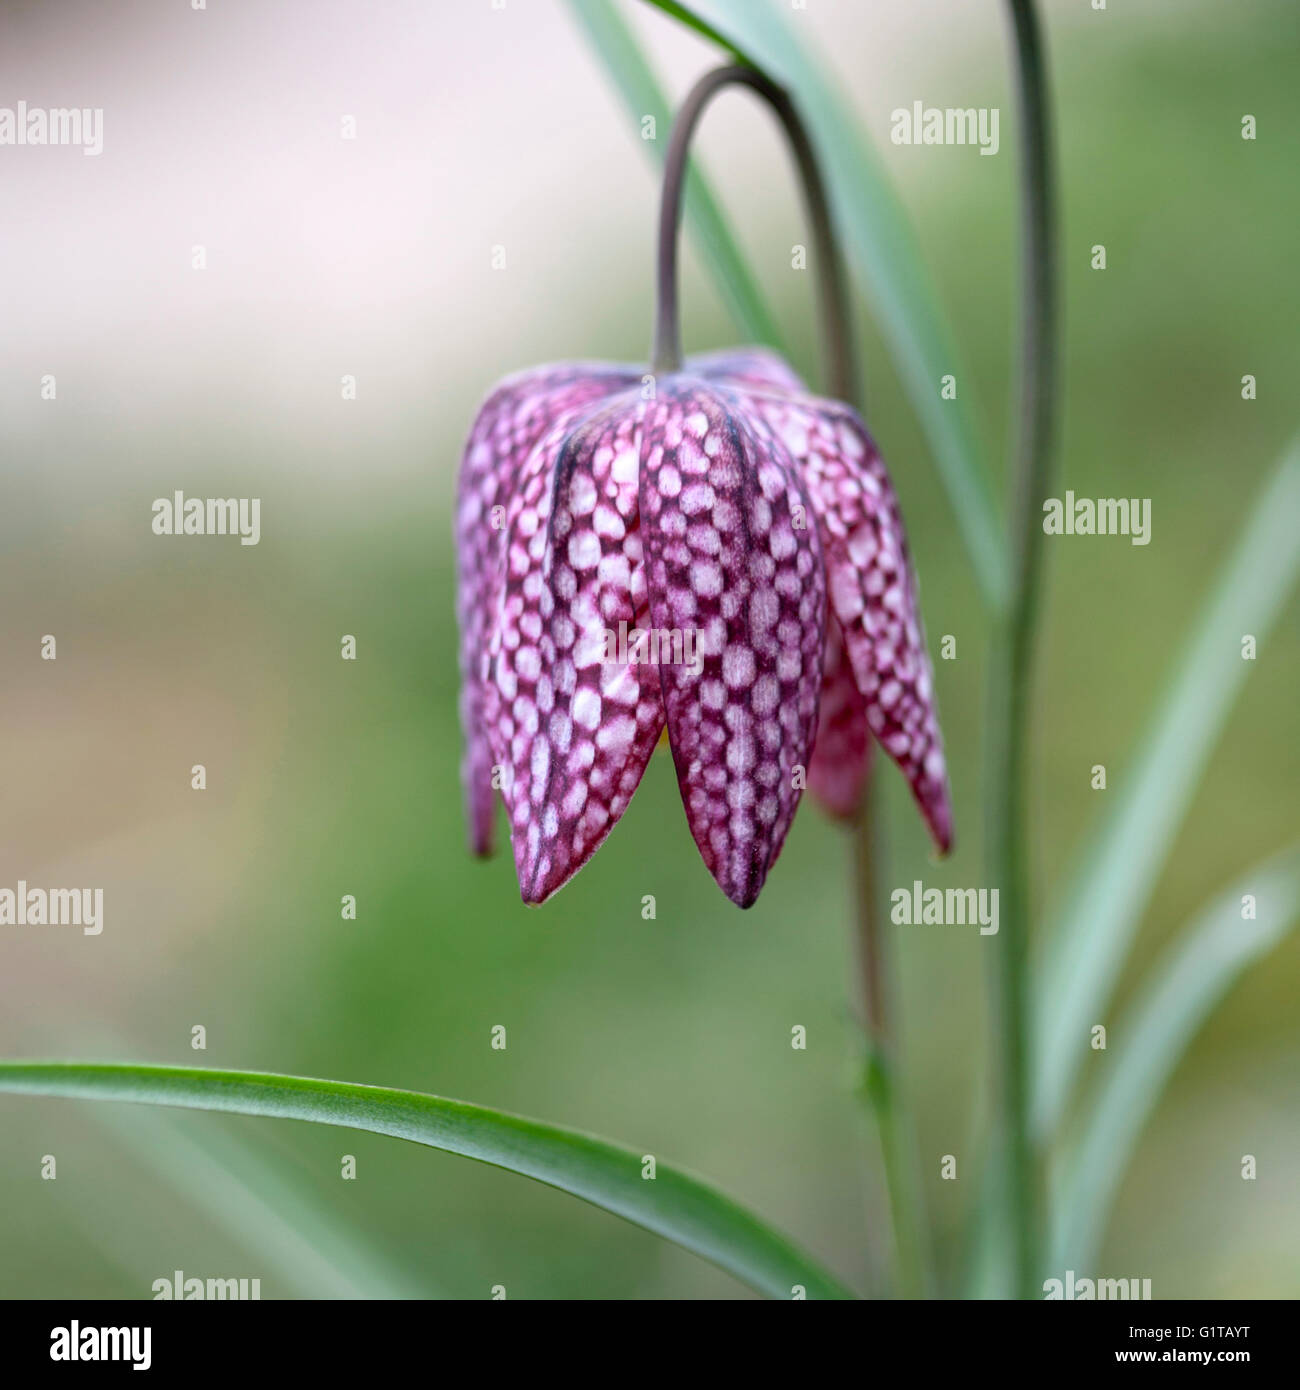 Close up of purple and white snake’s head fritillary flower Stock Photo